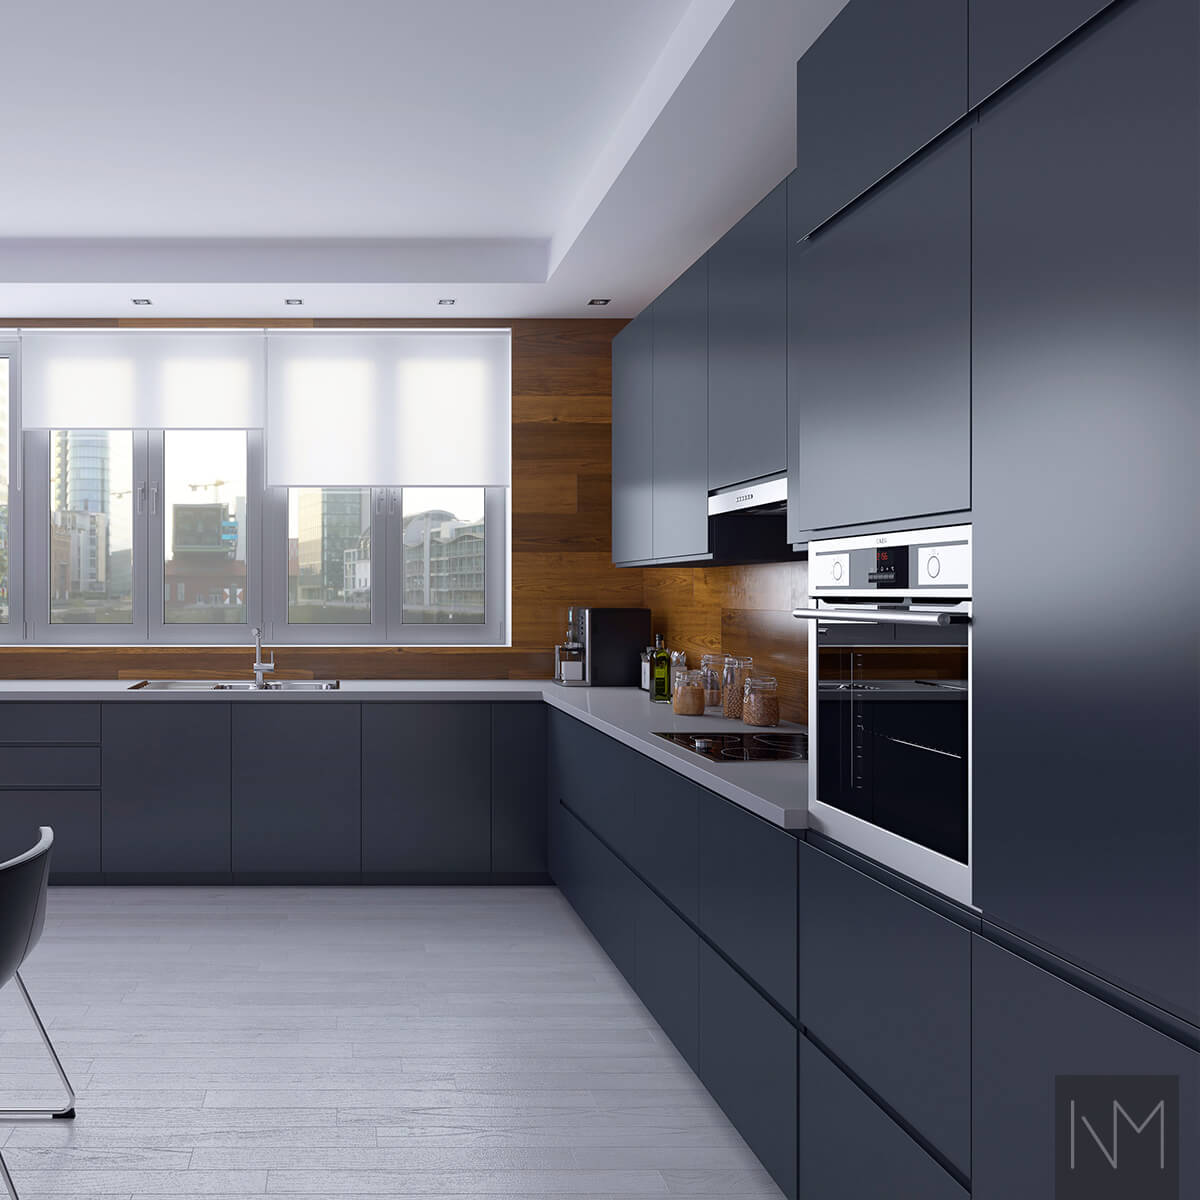 Cucina IKEA Metod o Faktum in design Instyle. Colore NCS S8105-R94B o Jotun Sophisticated Blue 4744